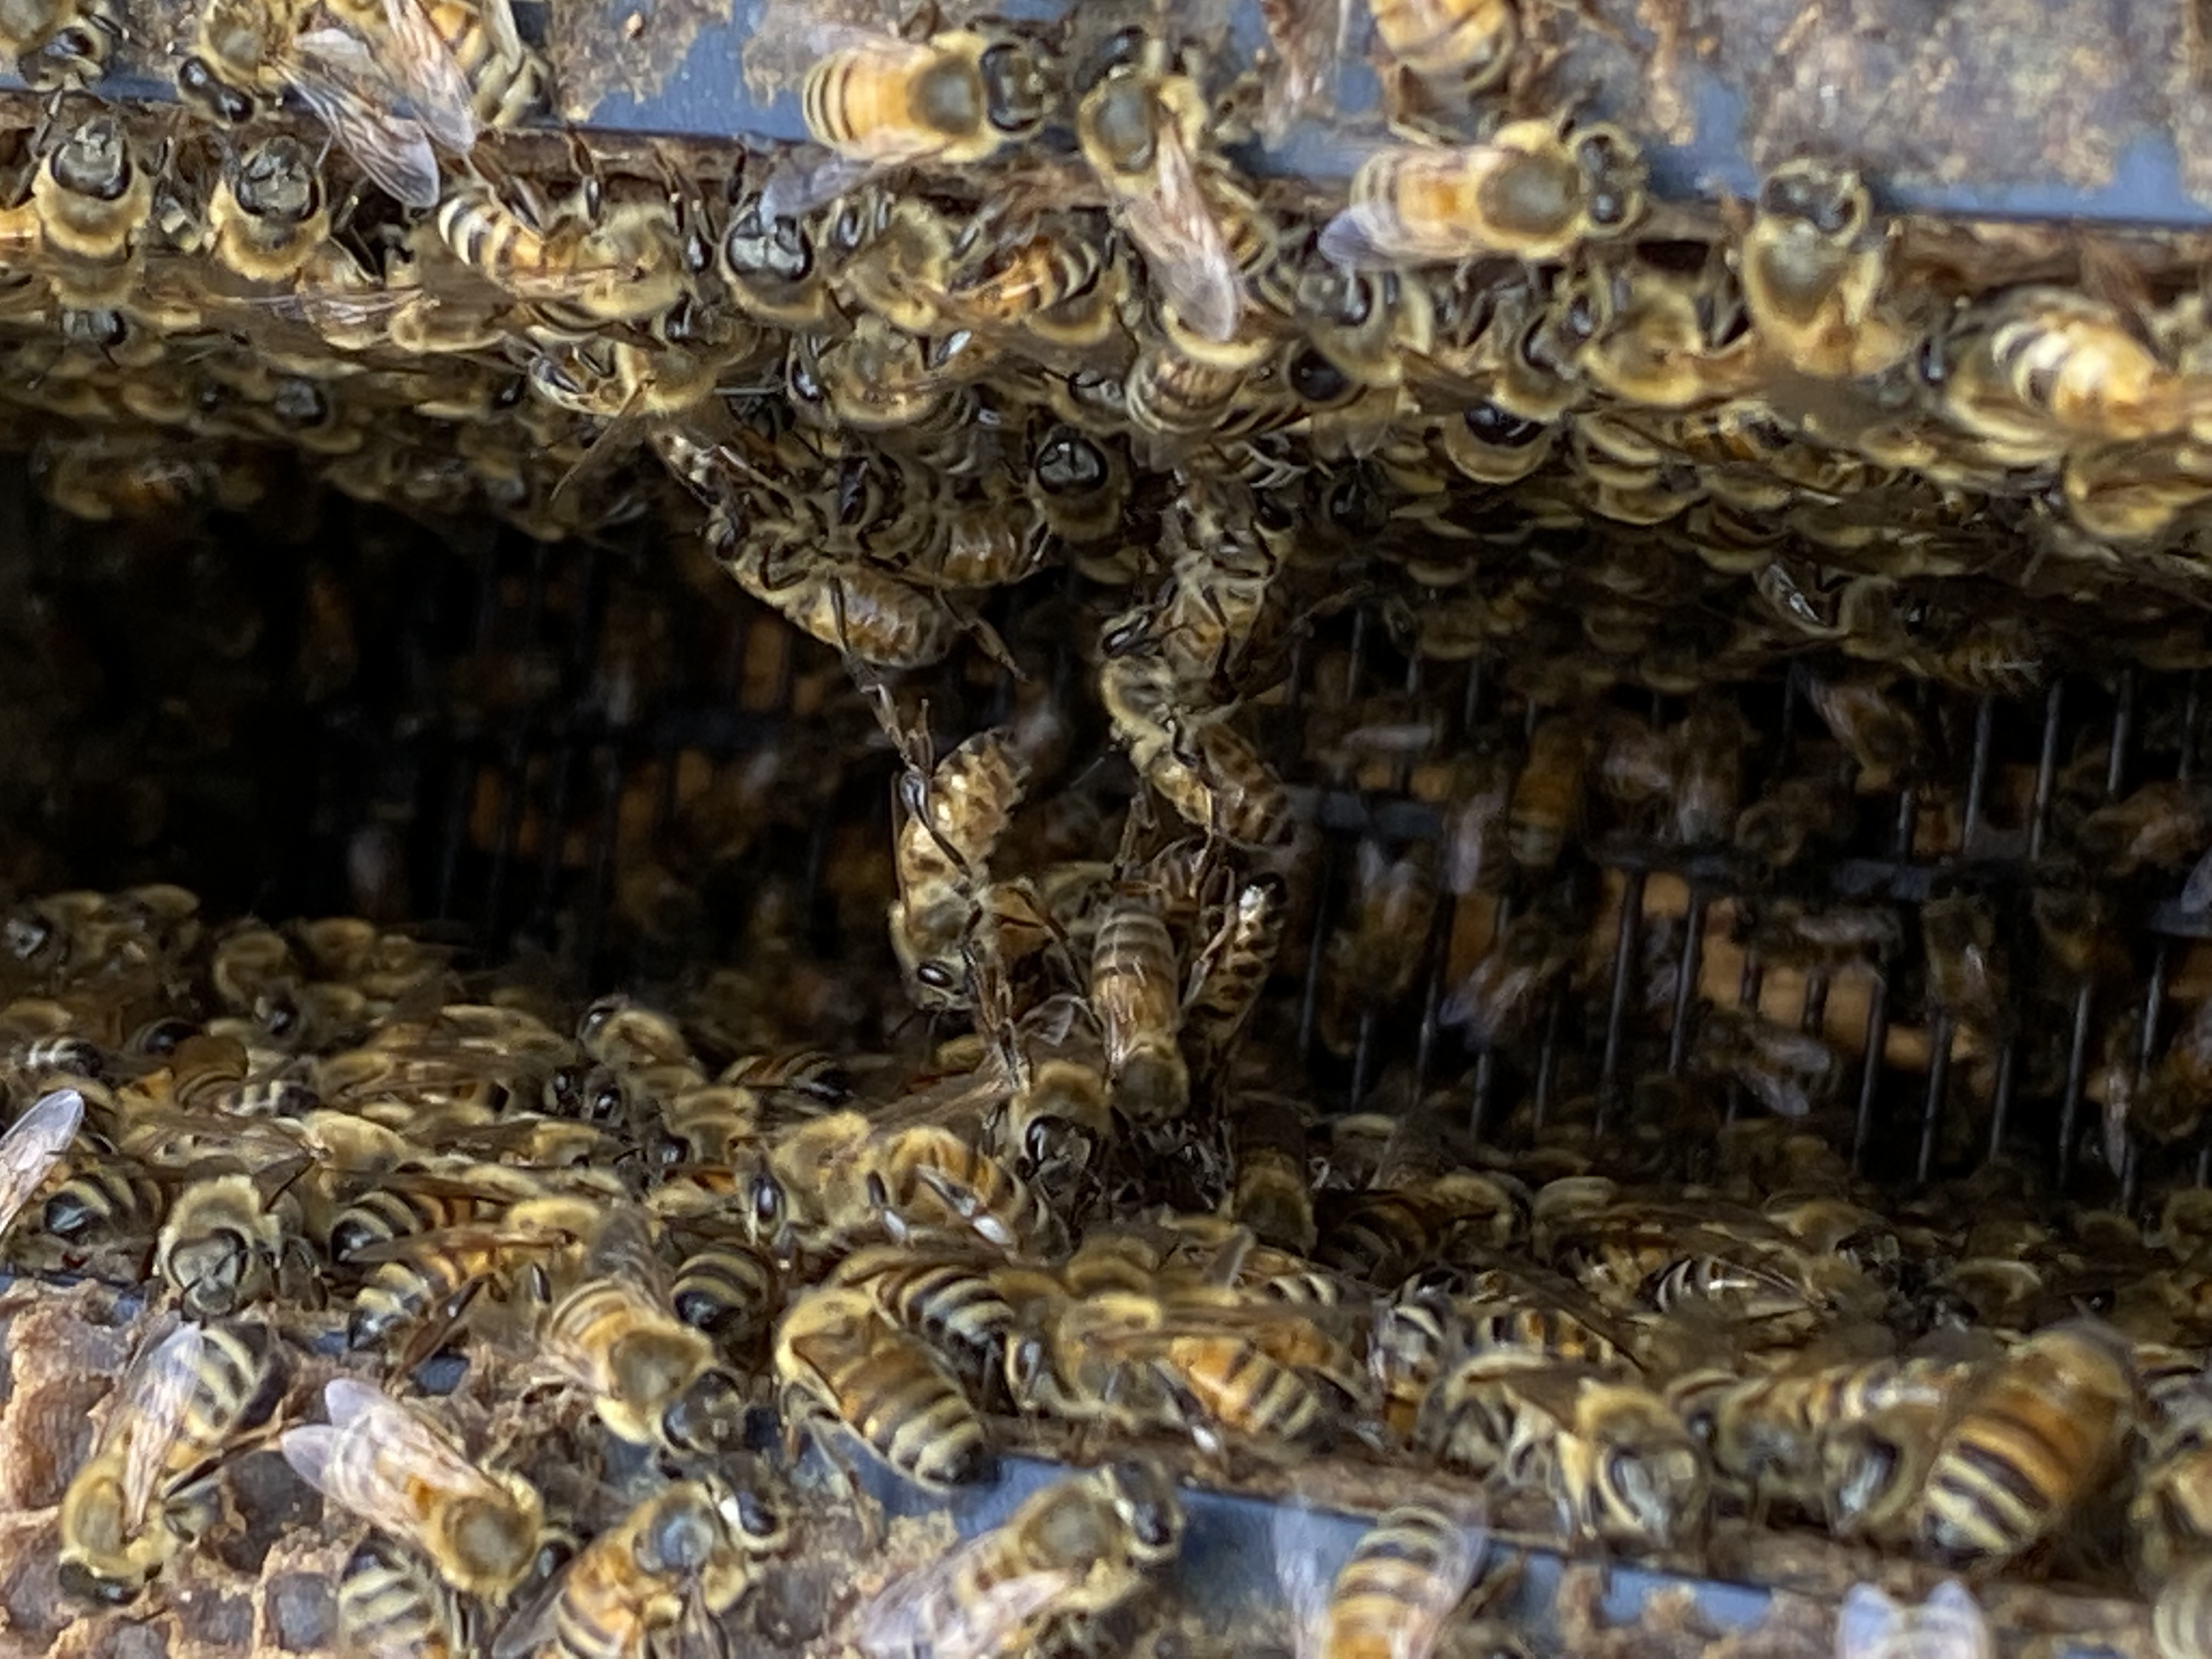 Hundreds of bees formed in what looks like a chain